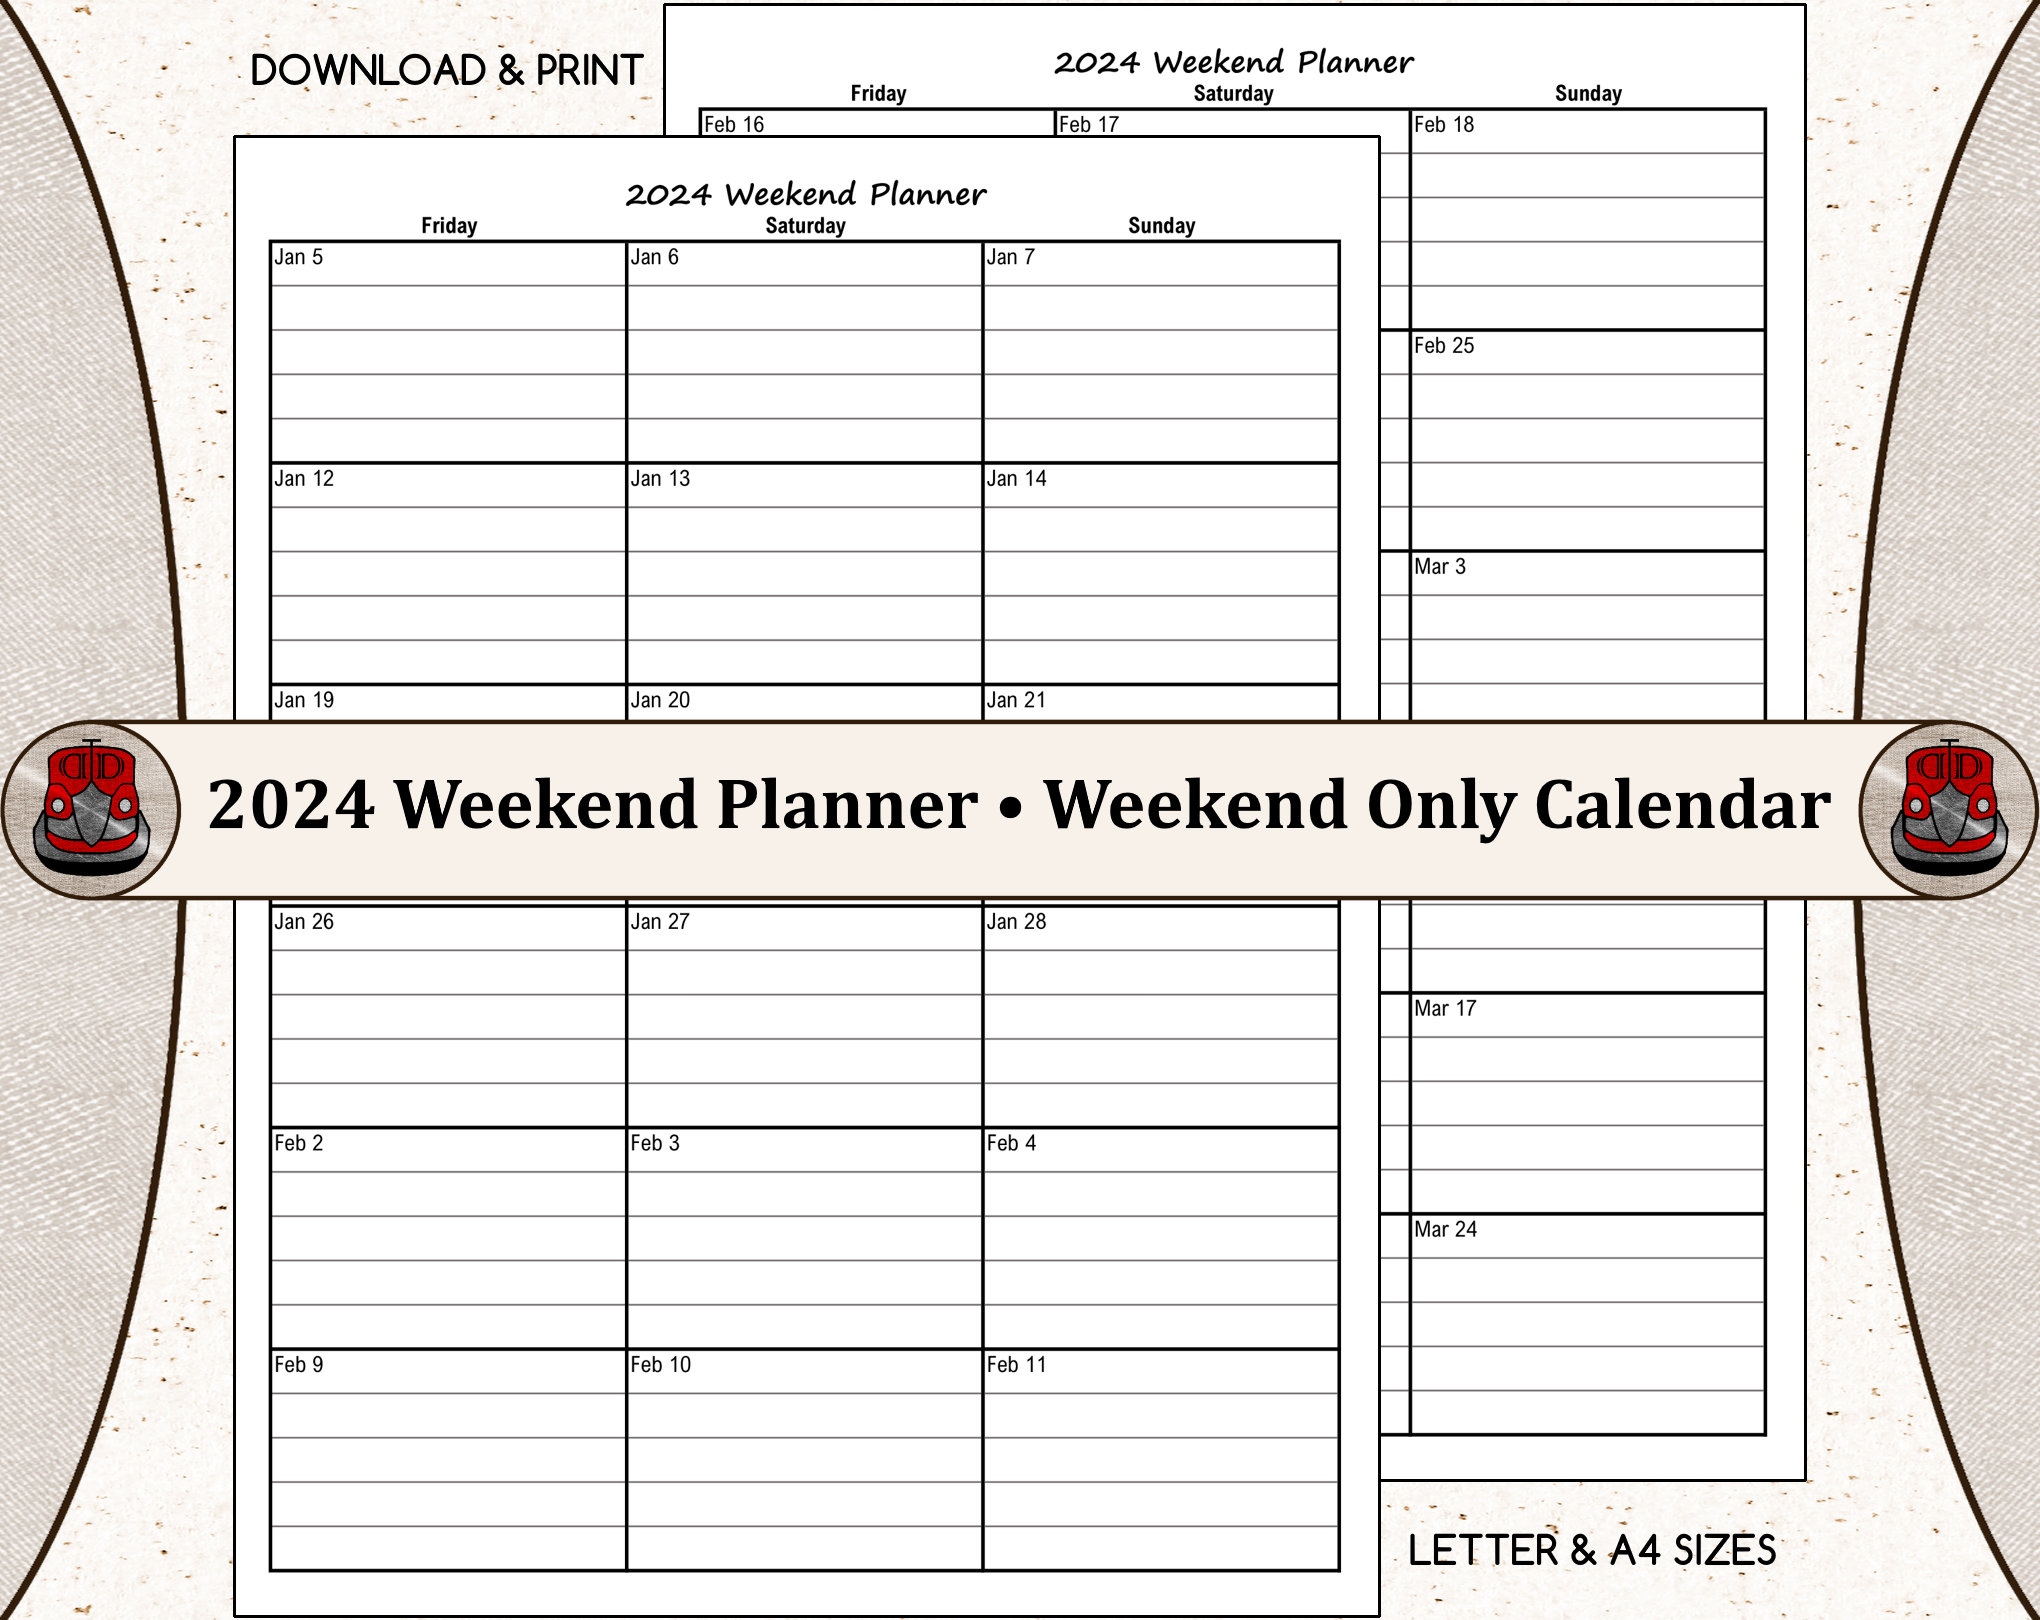 2024 Weekend Planner Weekend Only Calendar Us Letter And A4 Sizes for Free Printable Calendar 2024 Weekdays Only